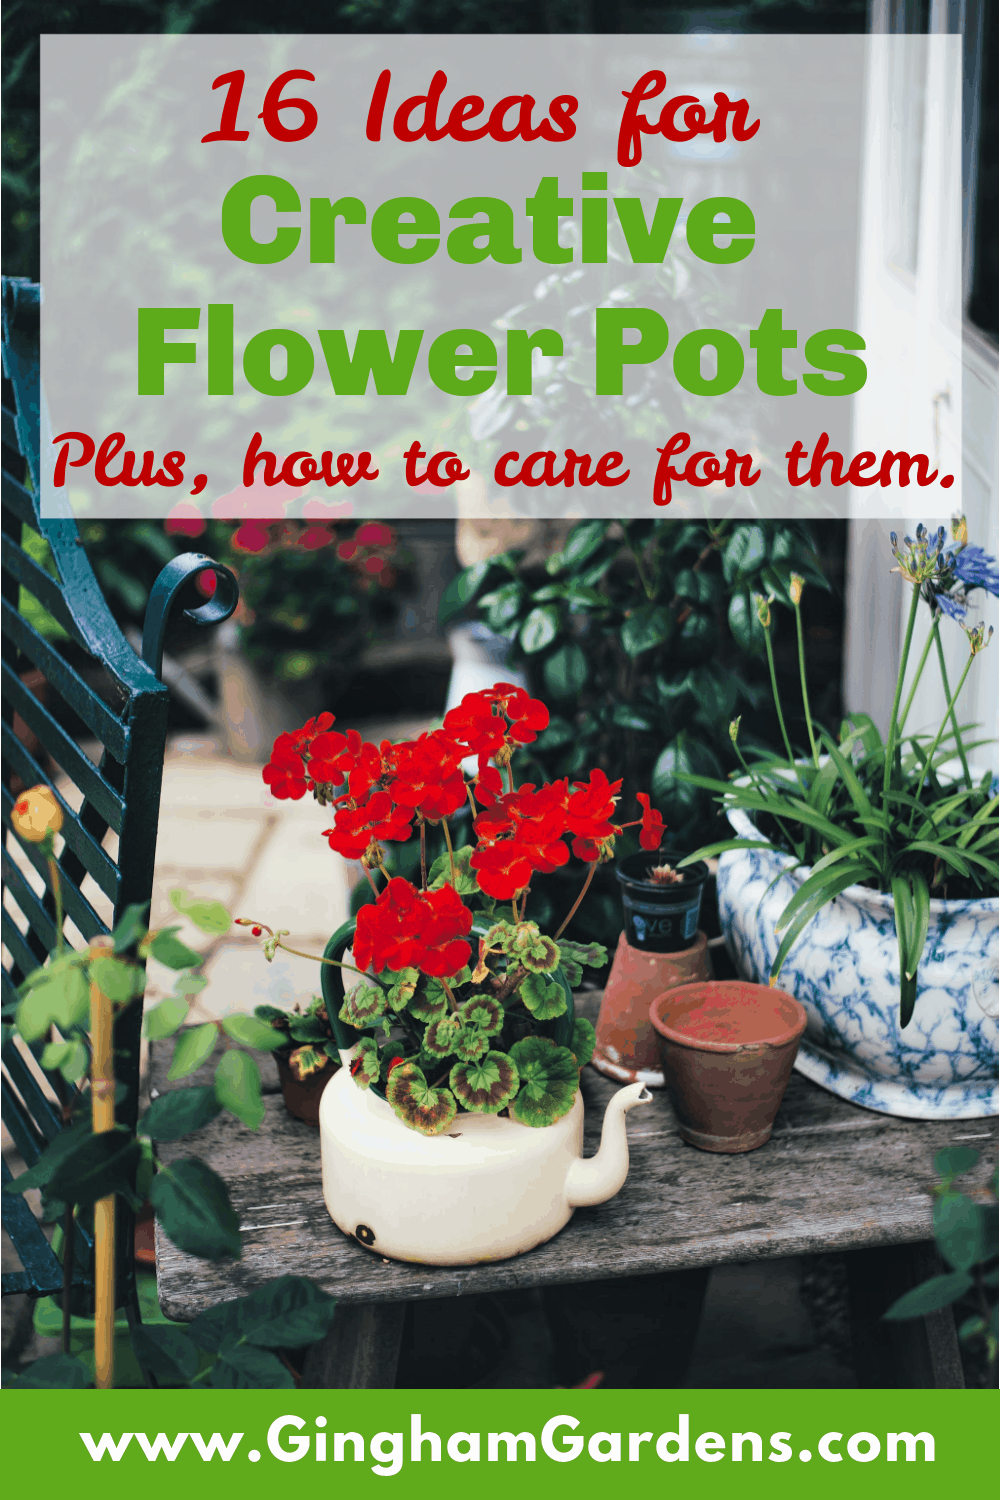 Image of a flower container garden with text overlay - 16 creative ideas for flower container gardens